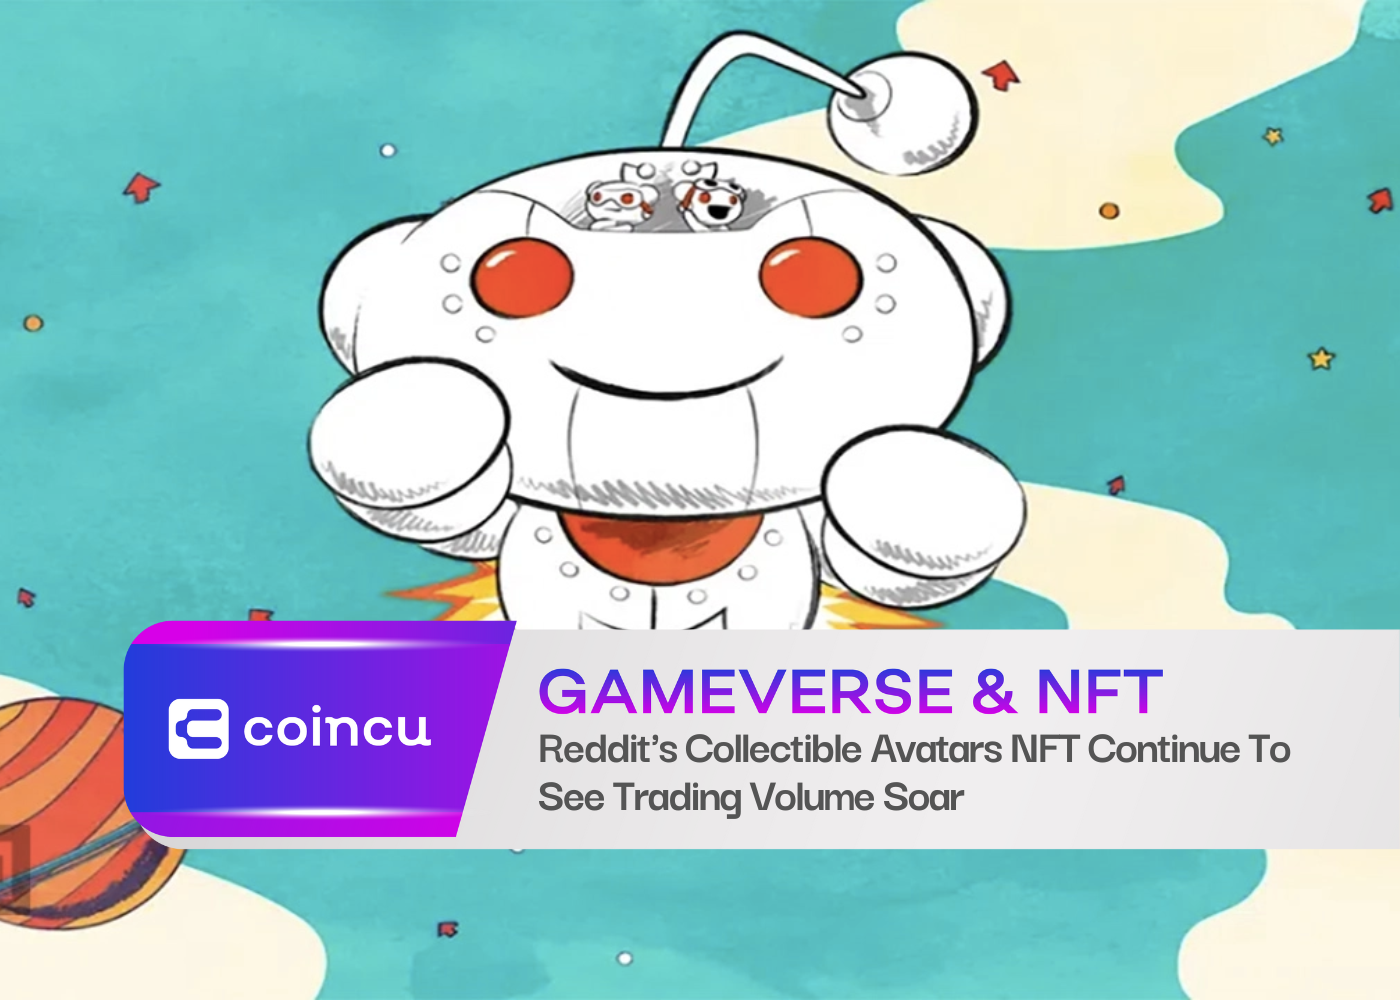 Reddit's Collectible Avatars NFT Continue To See Trading Volume Soar